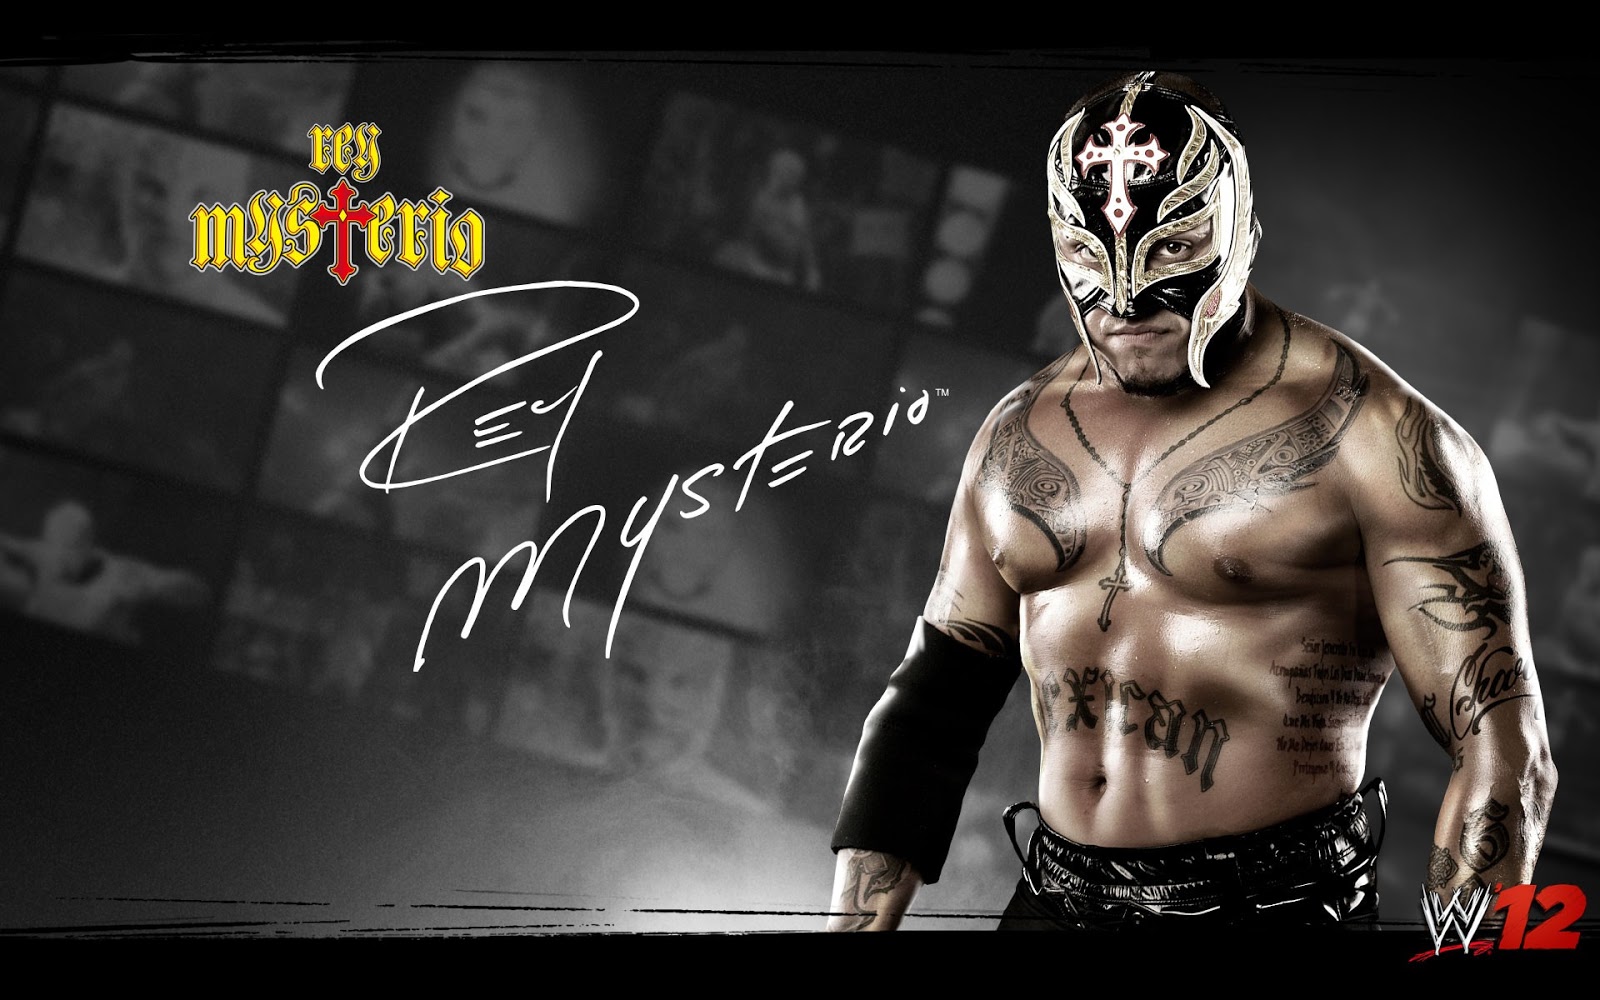 Wwe Wrestling Stars Rey Mysterio Pic And